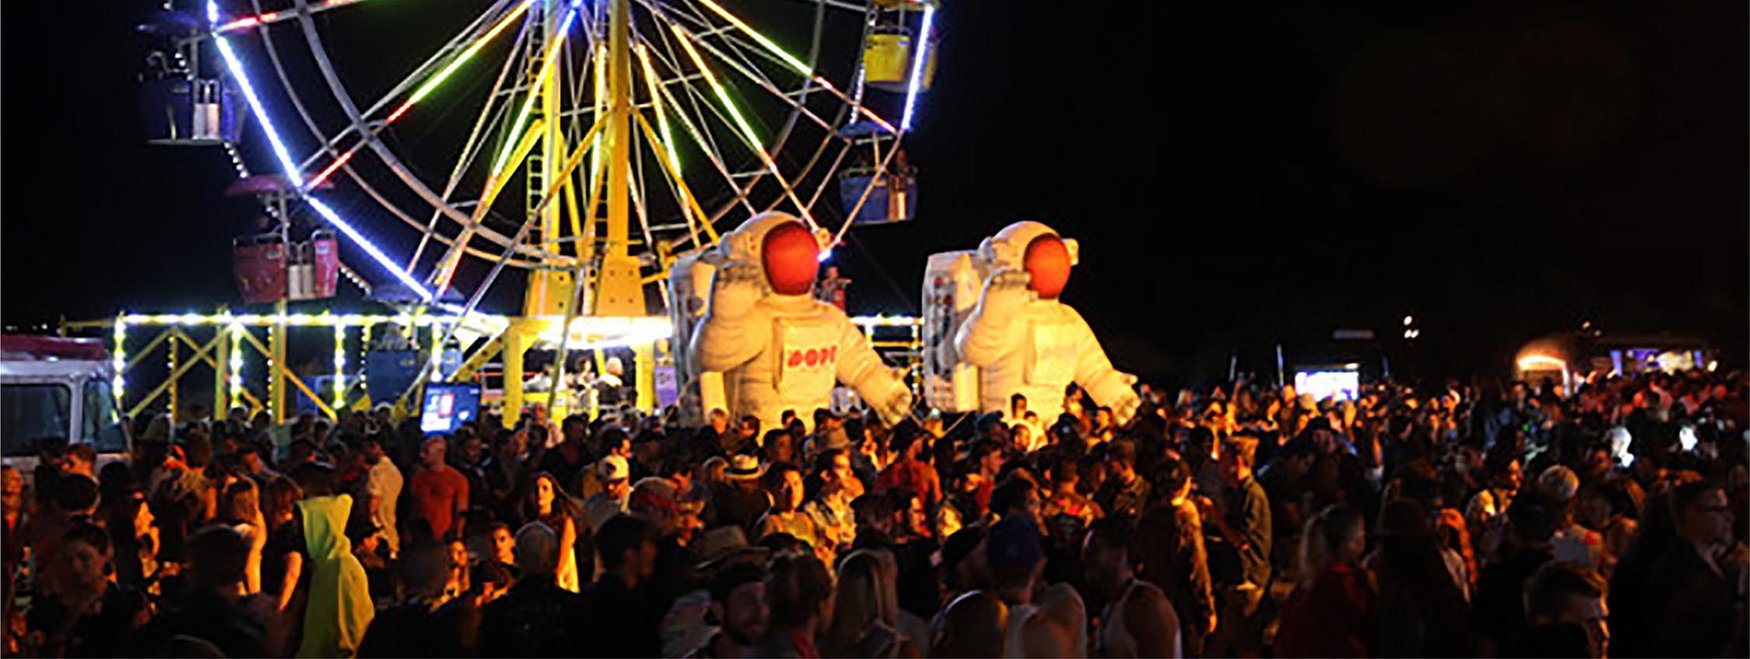 inflatable astronauts installed at a music festival as decorations